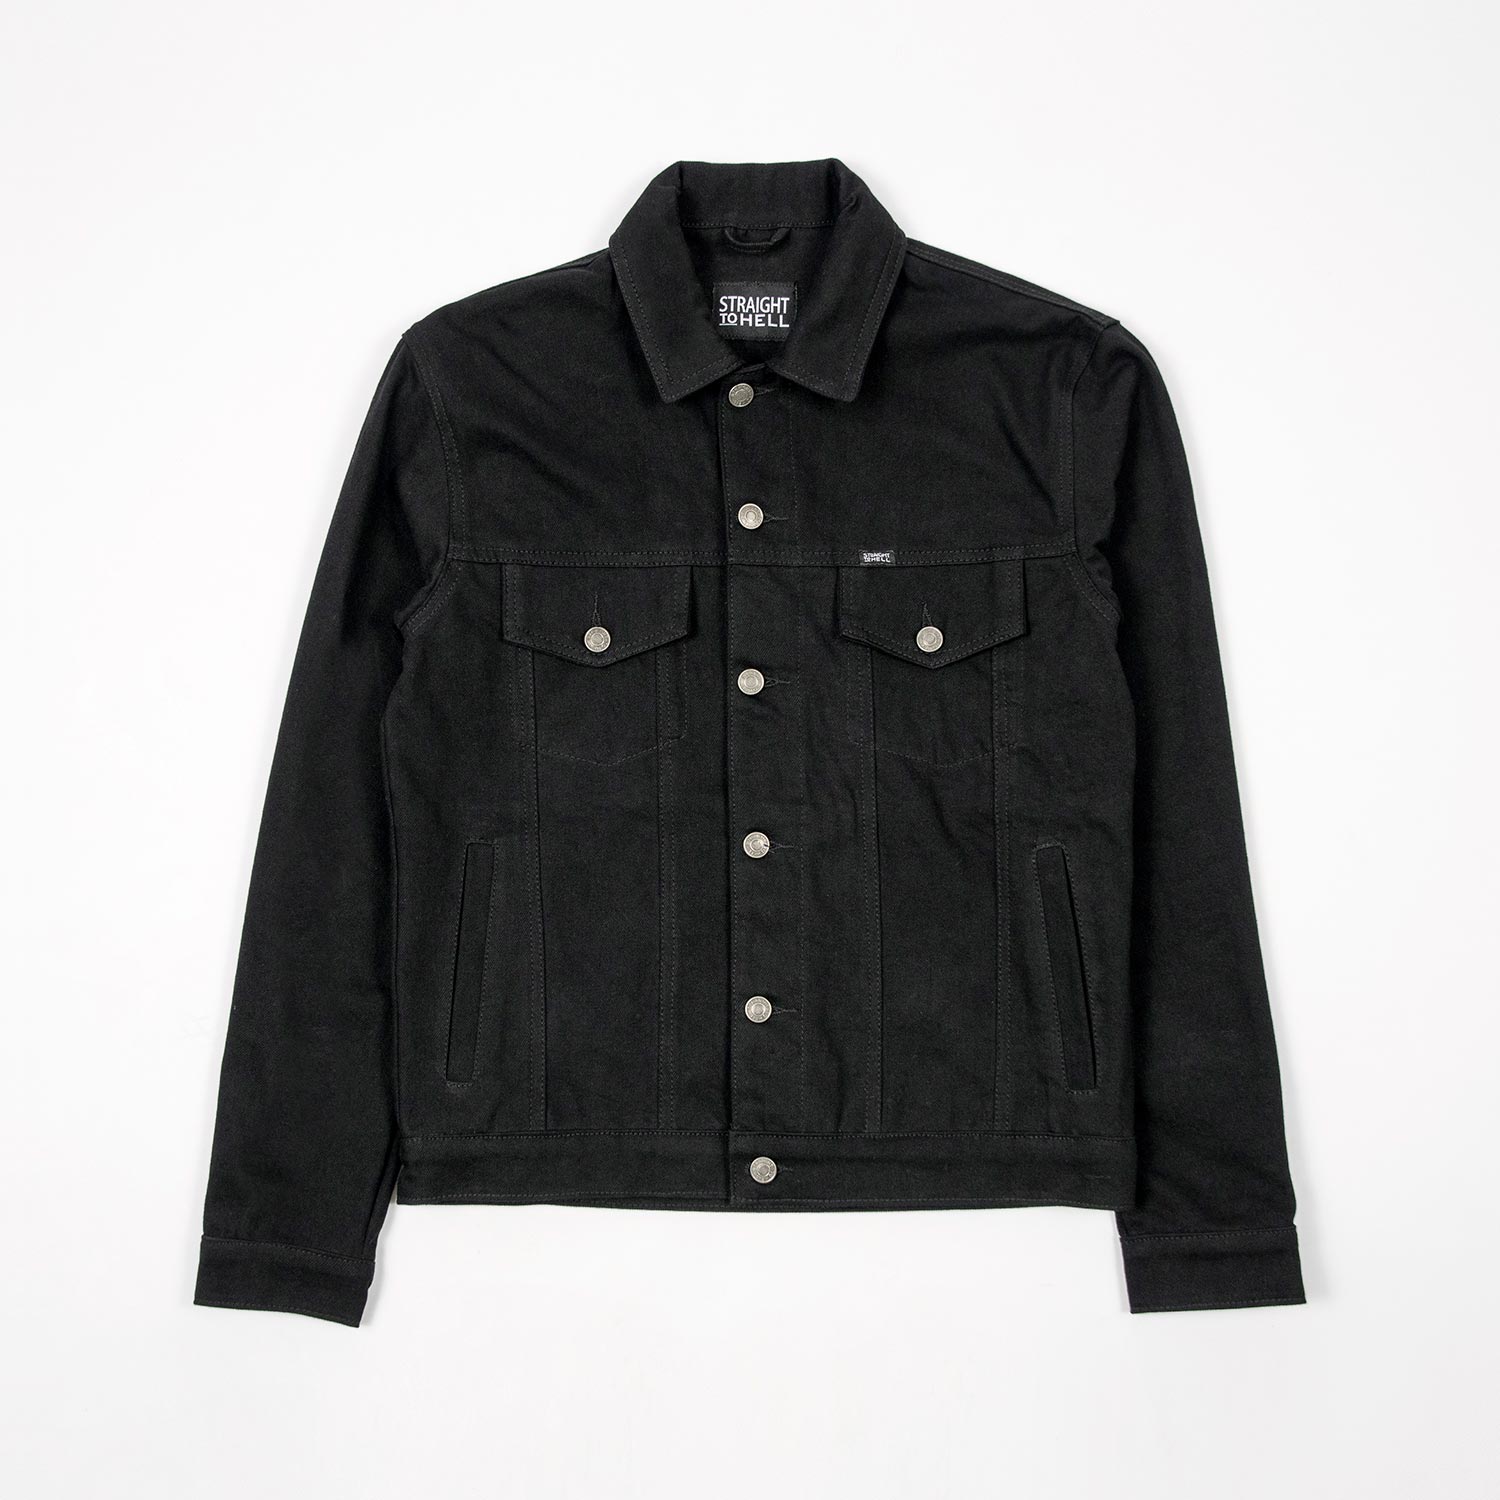 Straight to Hell Men's Outsider New Dawn Twill Denim Jacket